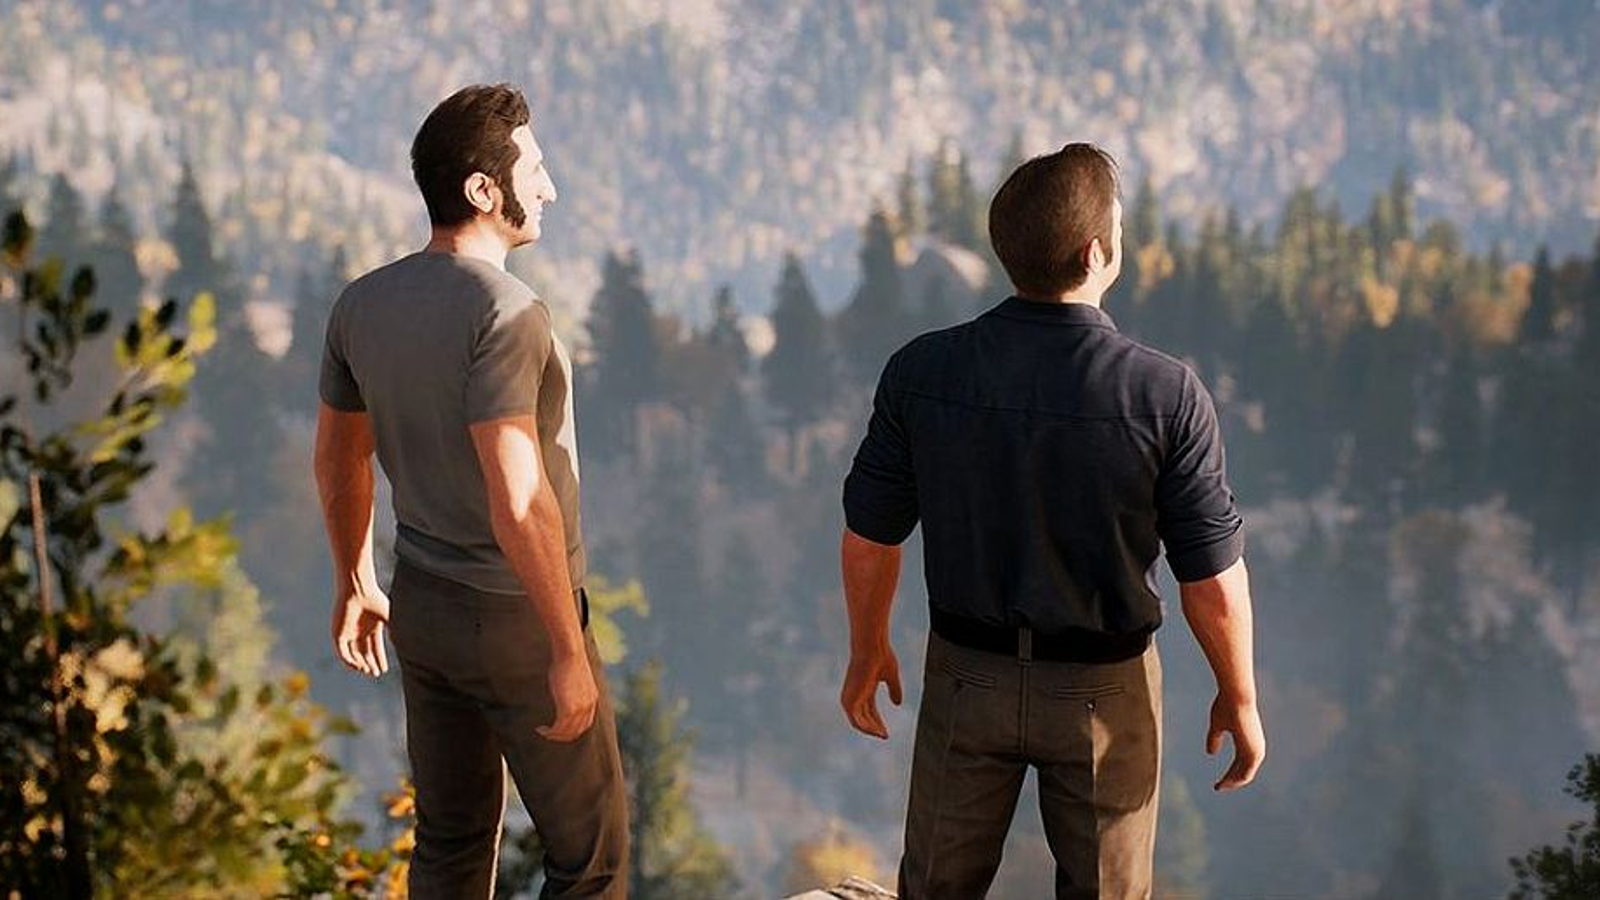 Coming out game. A way out Винсент. Way out игра. А Wаy оut игра. A way out (2018).